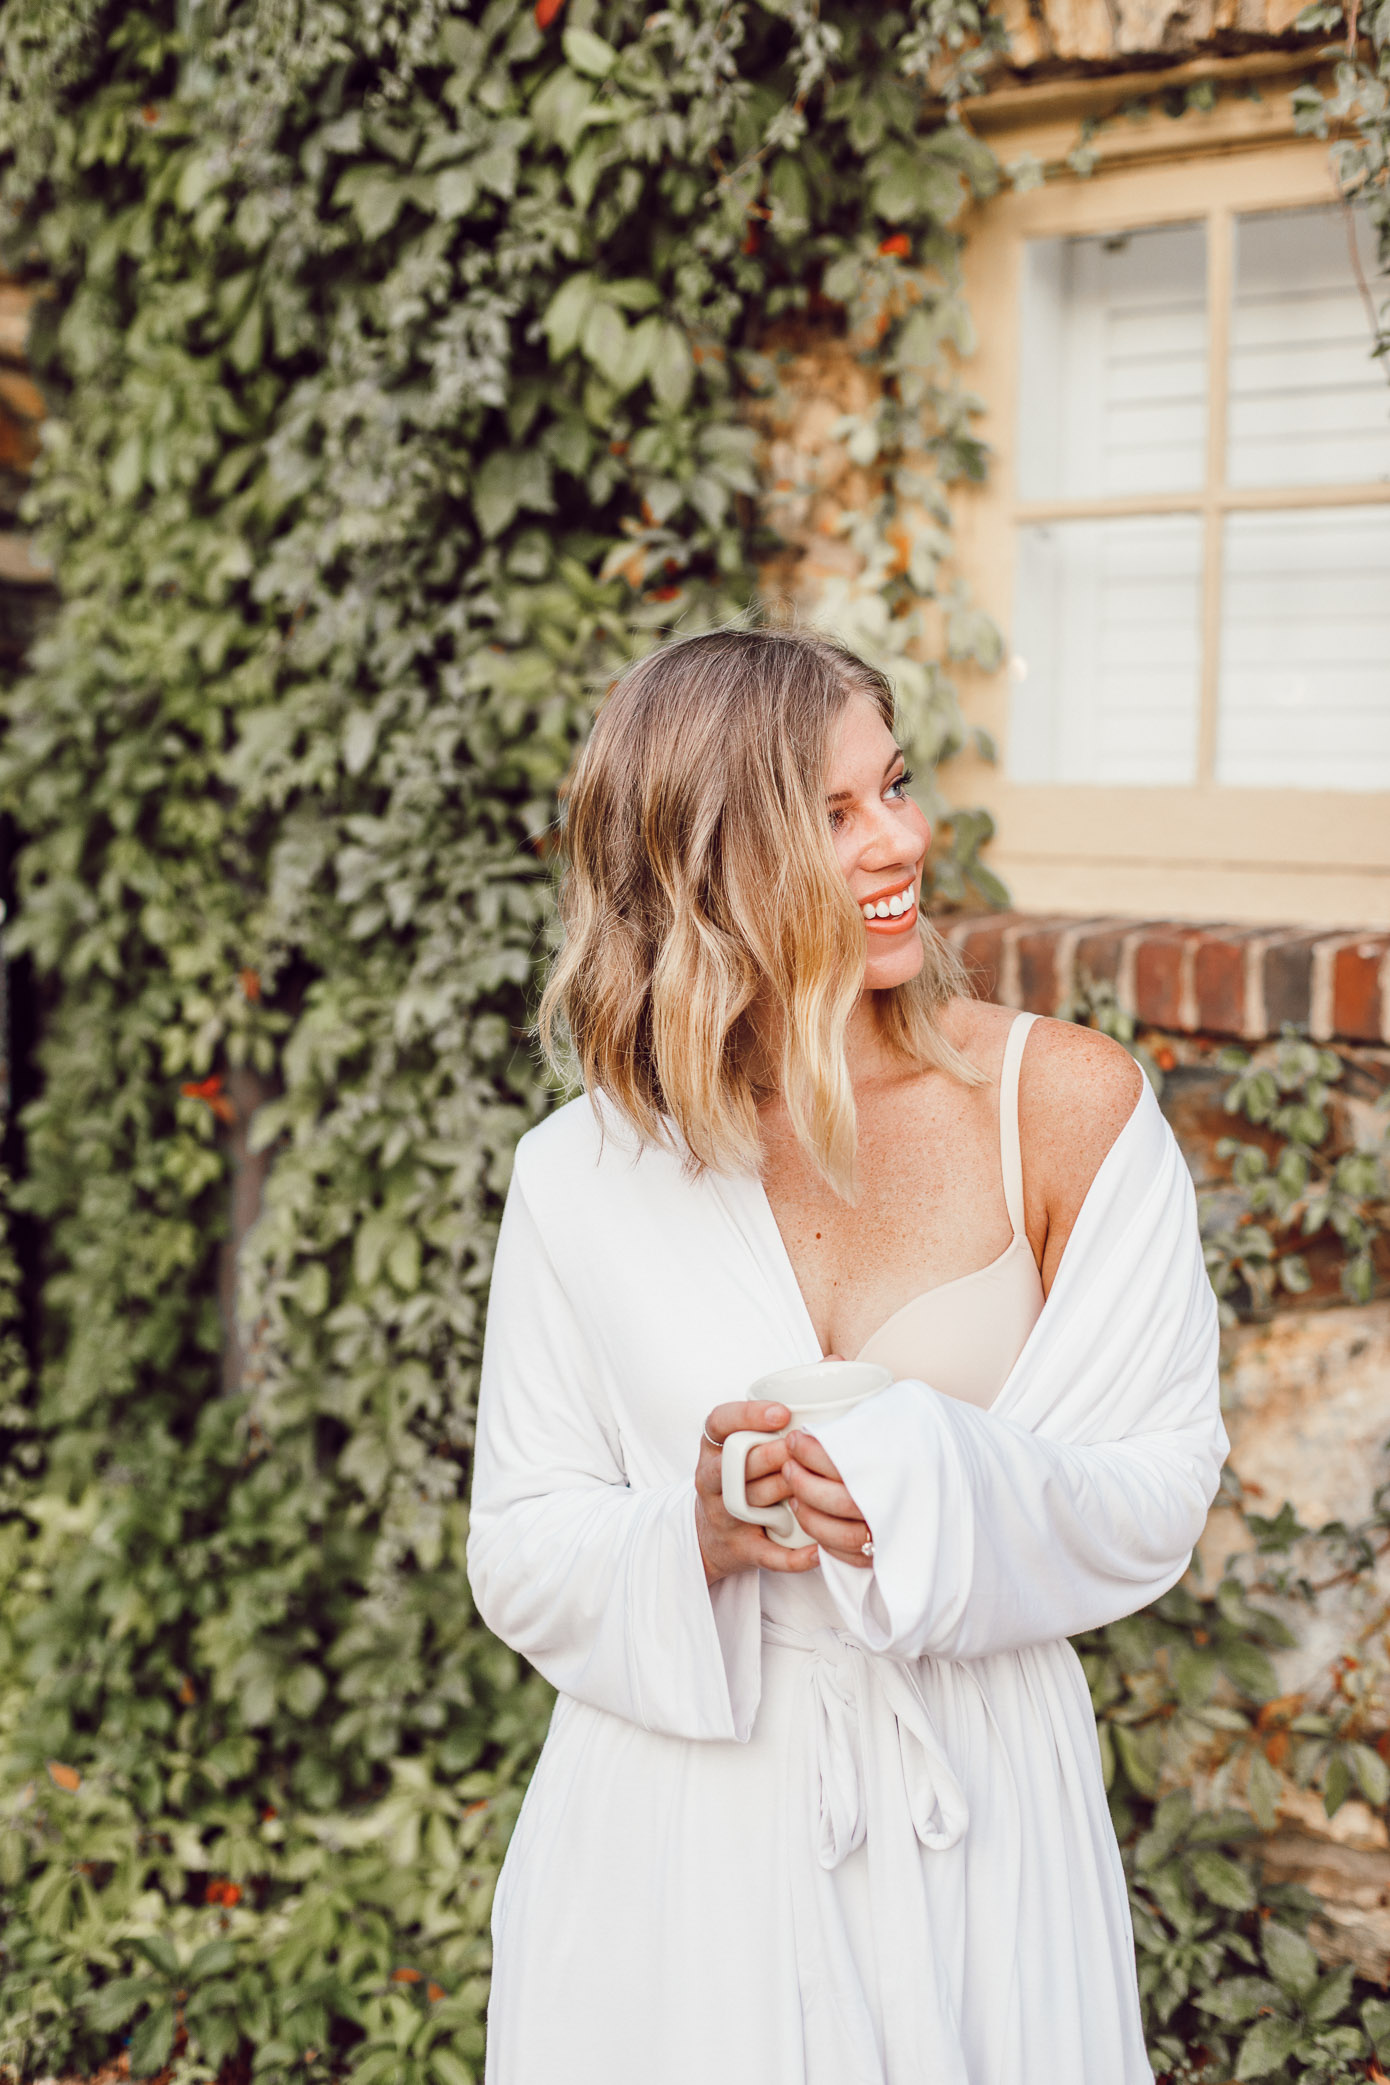 Summer Bras You Will Love Wearing | The Best Bra for Summer | Louella Reese